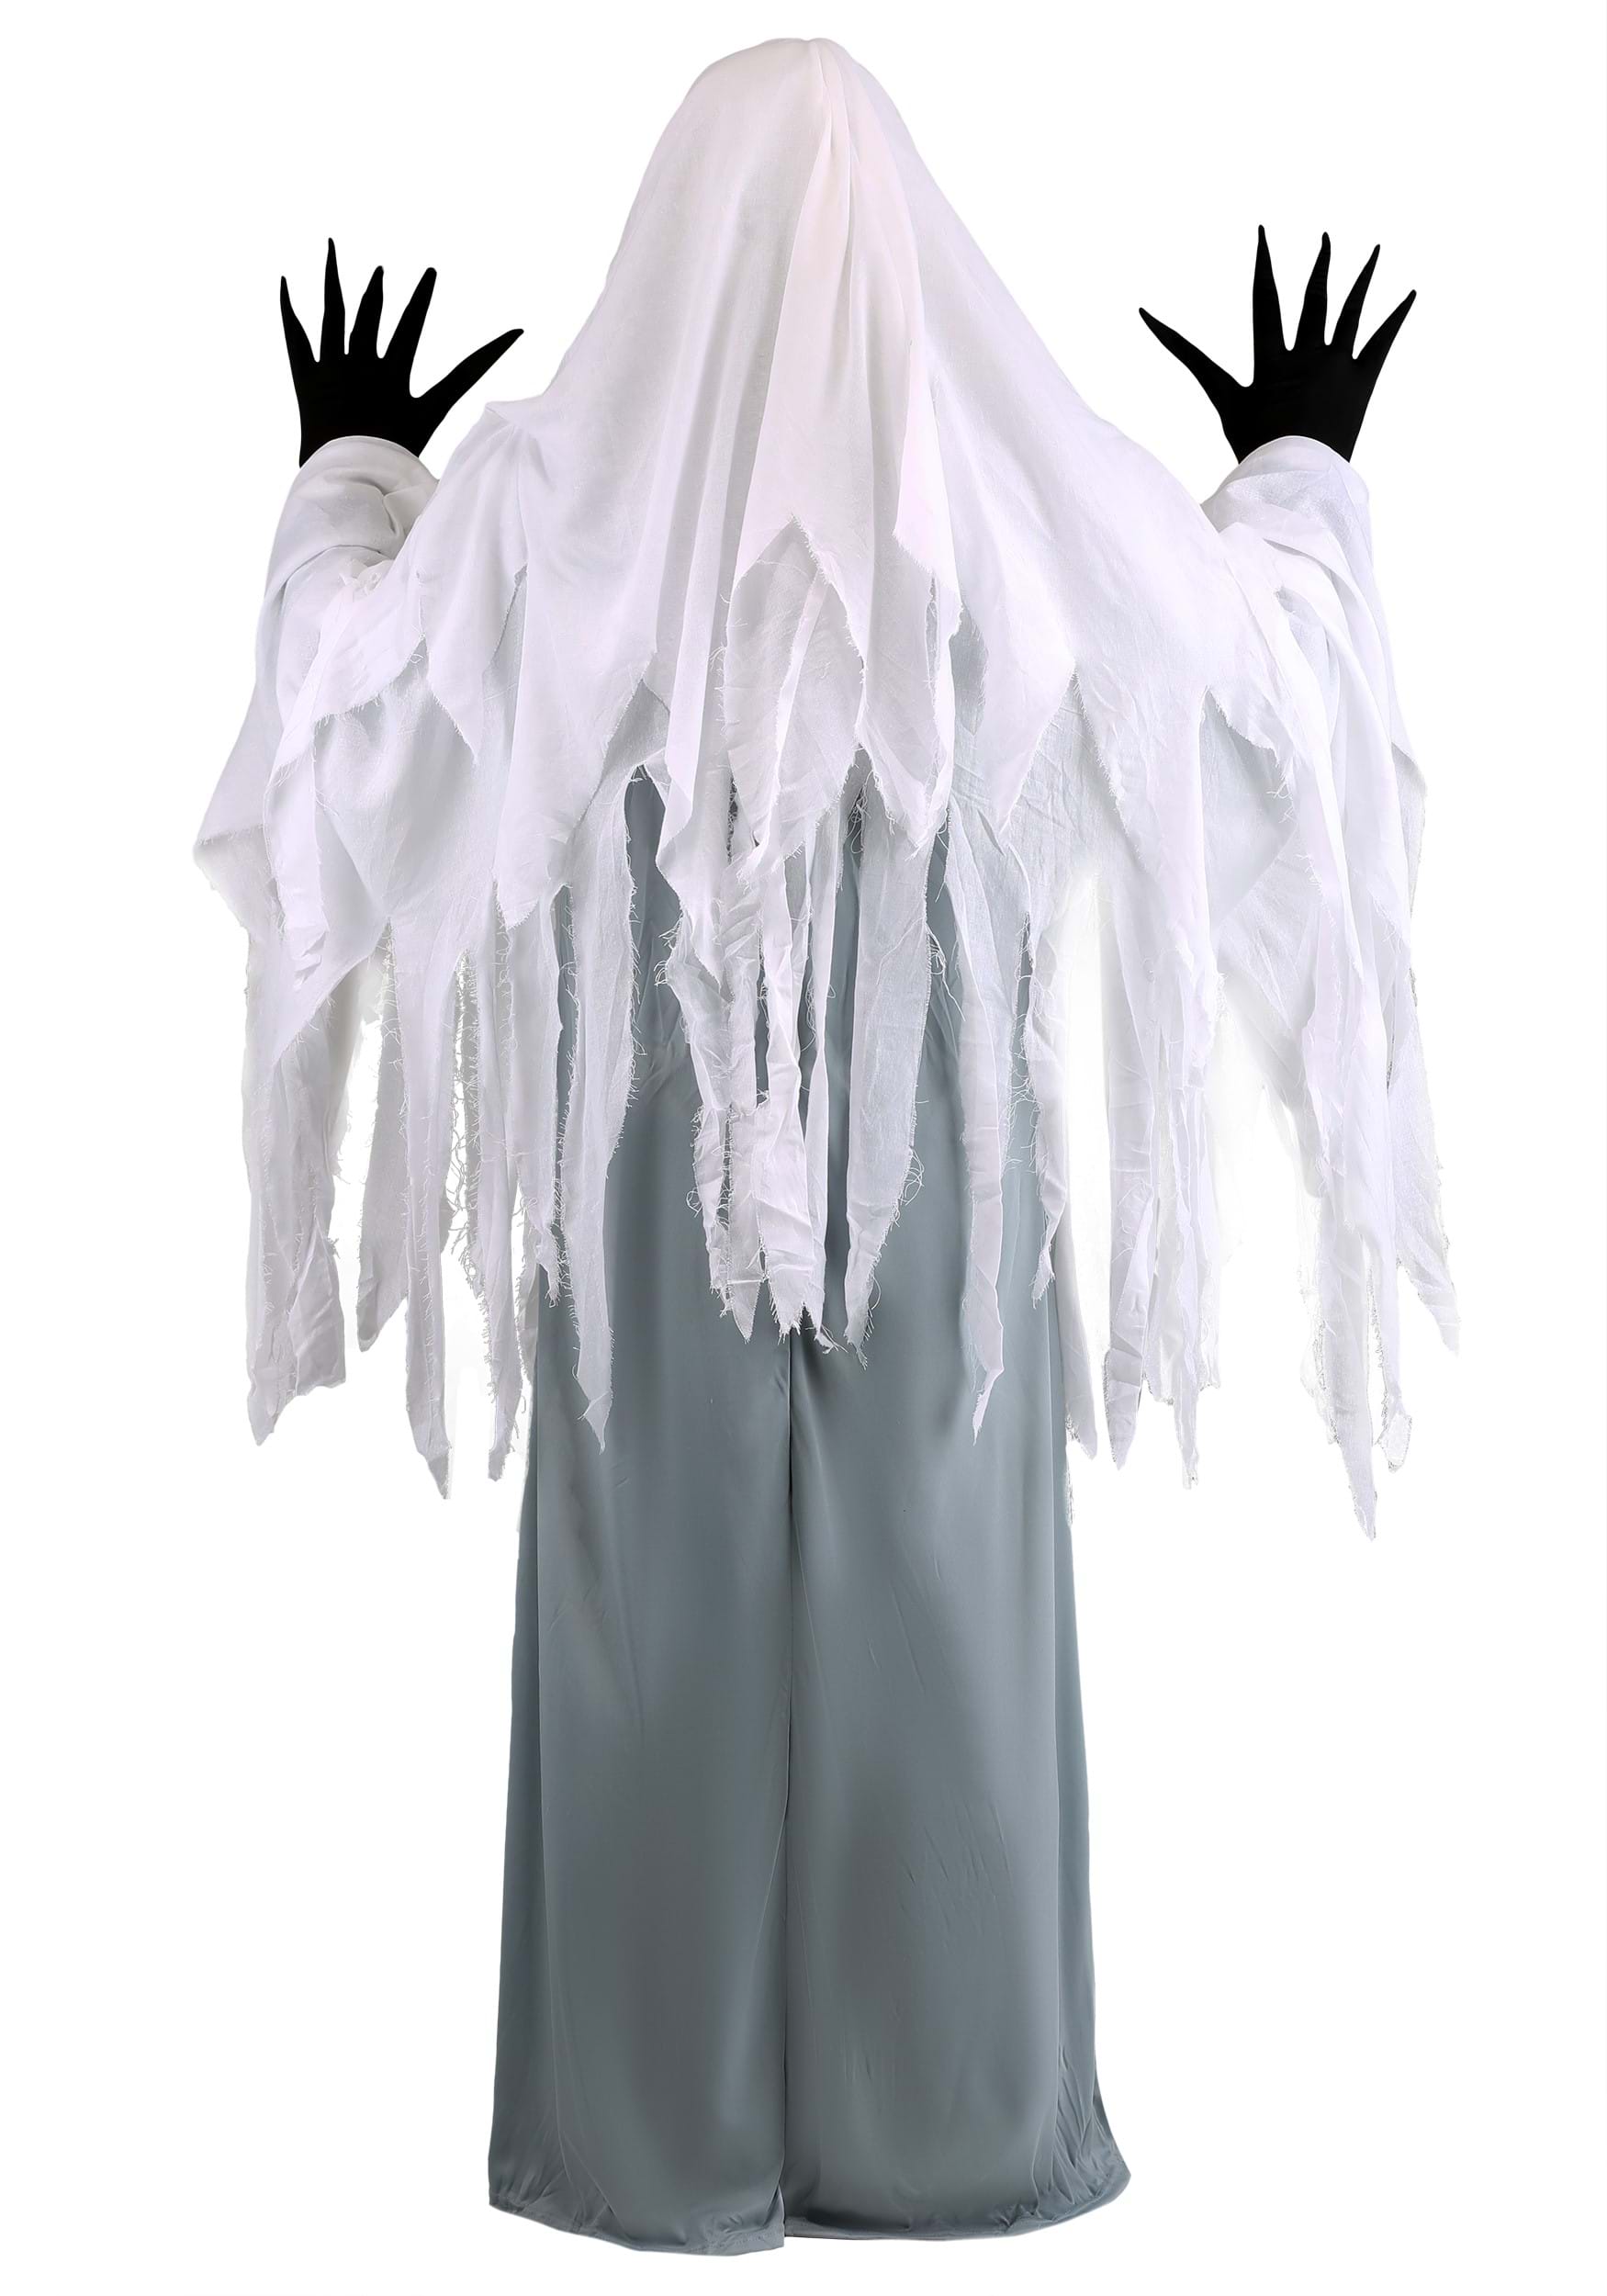 Plus Size Spooky Ghost Adult Costume